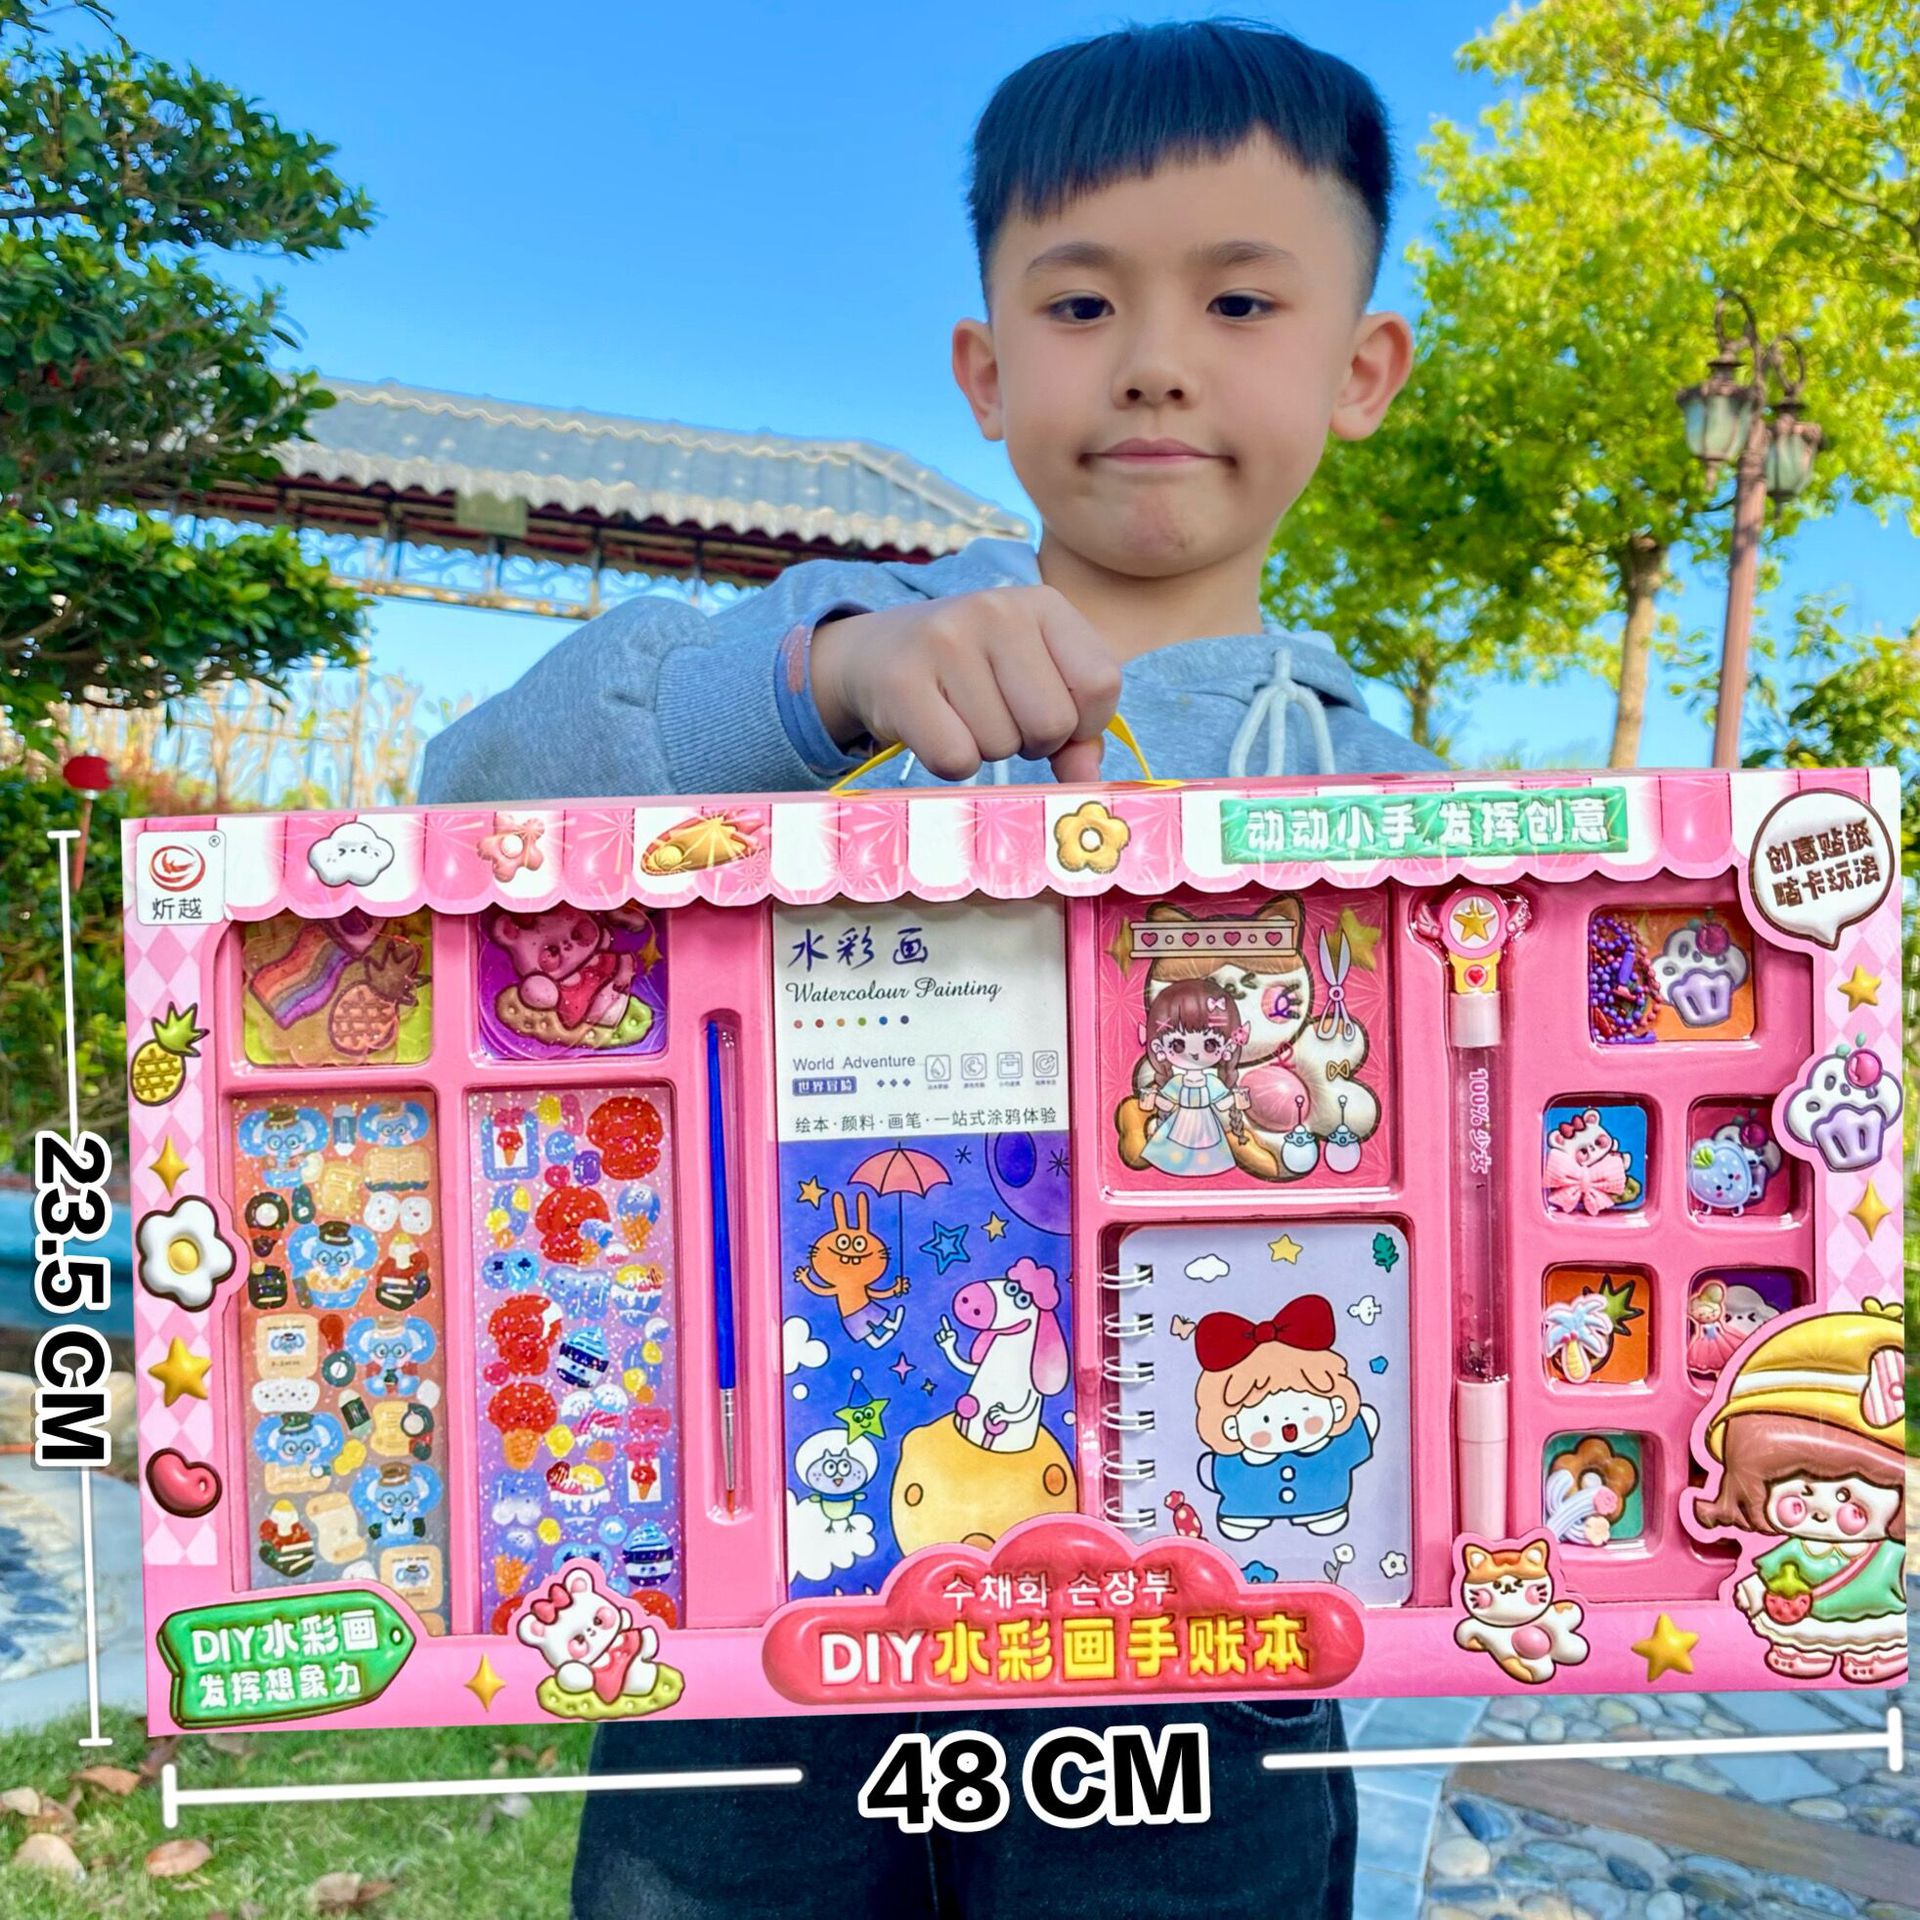 Children's Simulation Kitchen Play House Toy Vegetable Fruit Food Refrigerator Suit Girls' Toy Agency Gift